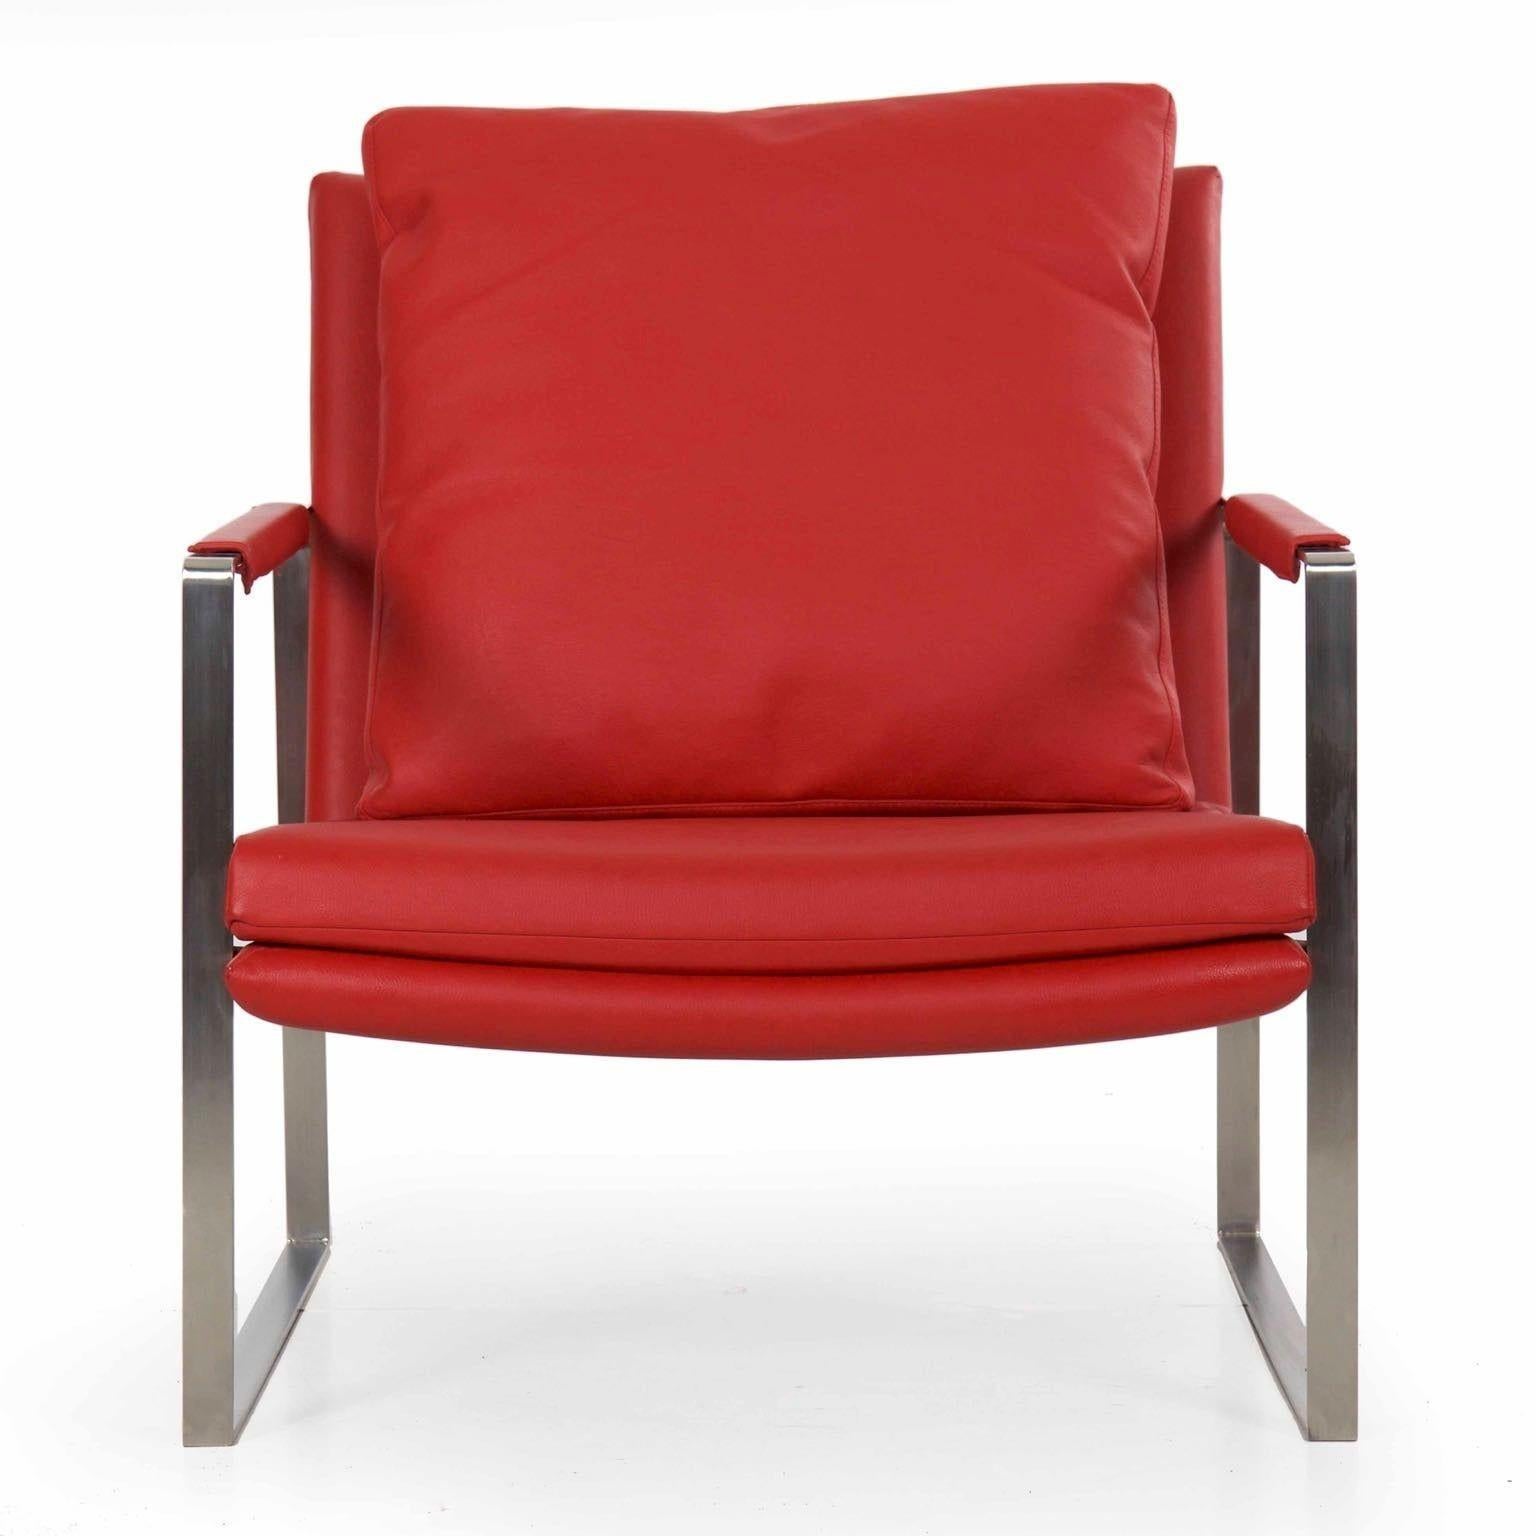 MODERN BRUSHED STEEL CUBE LOUNGE CHAIR
In recent red naughahyde, circa late 20th century
Item # 803WBP15 

This is a very high quality modern lounge chair crafted of welded brushed flatbar steel in cube form.  Distinctly reminiscent of the designs